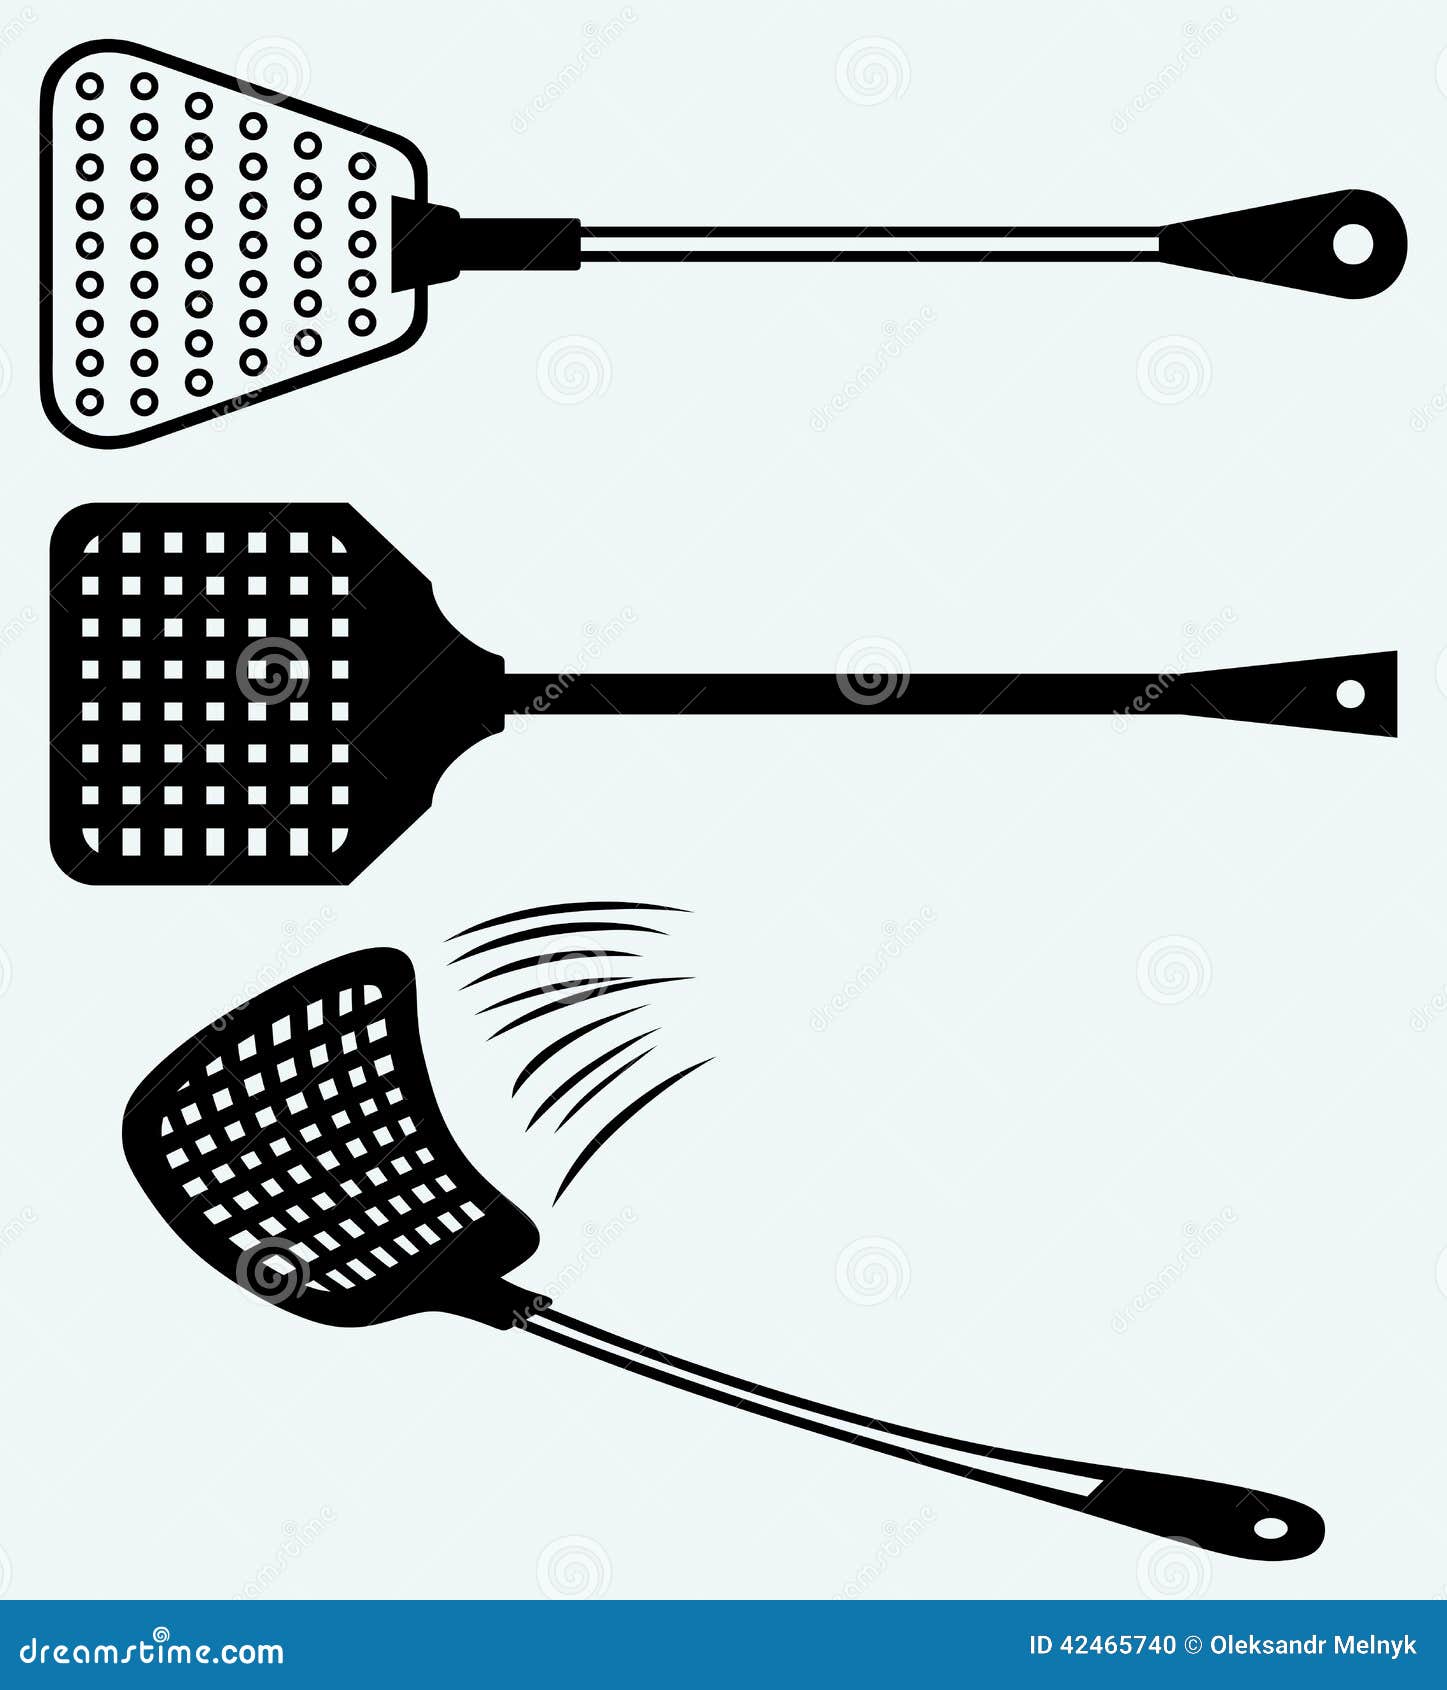 fly swat clipart - photo #10